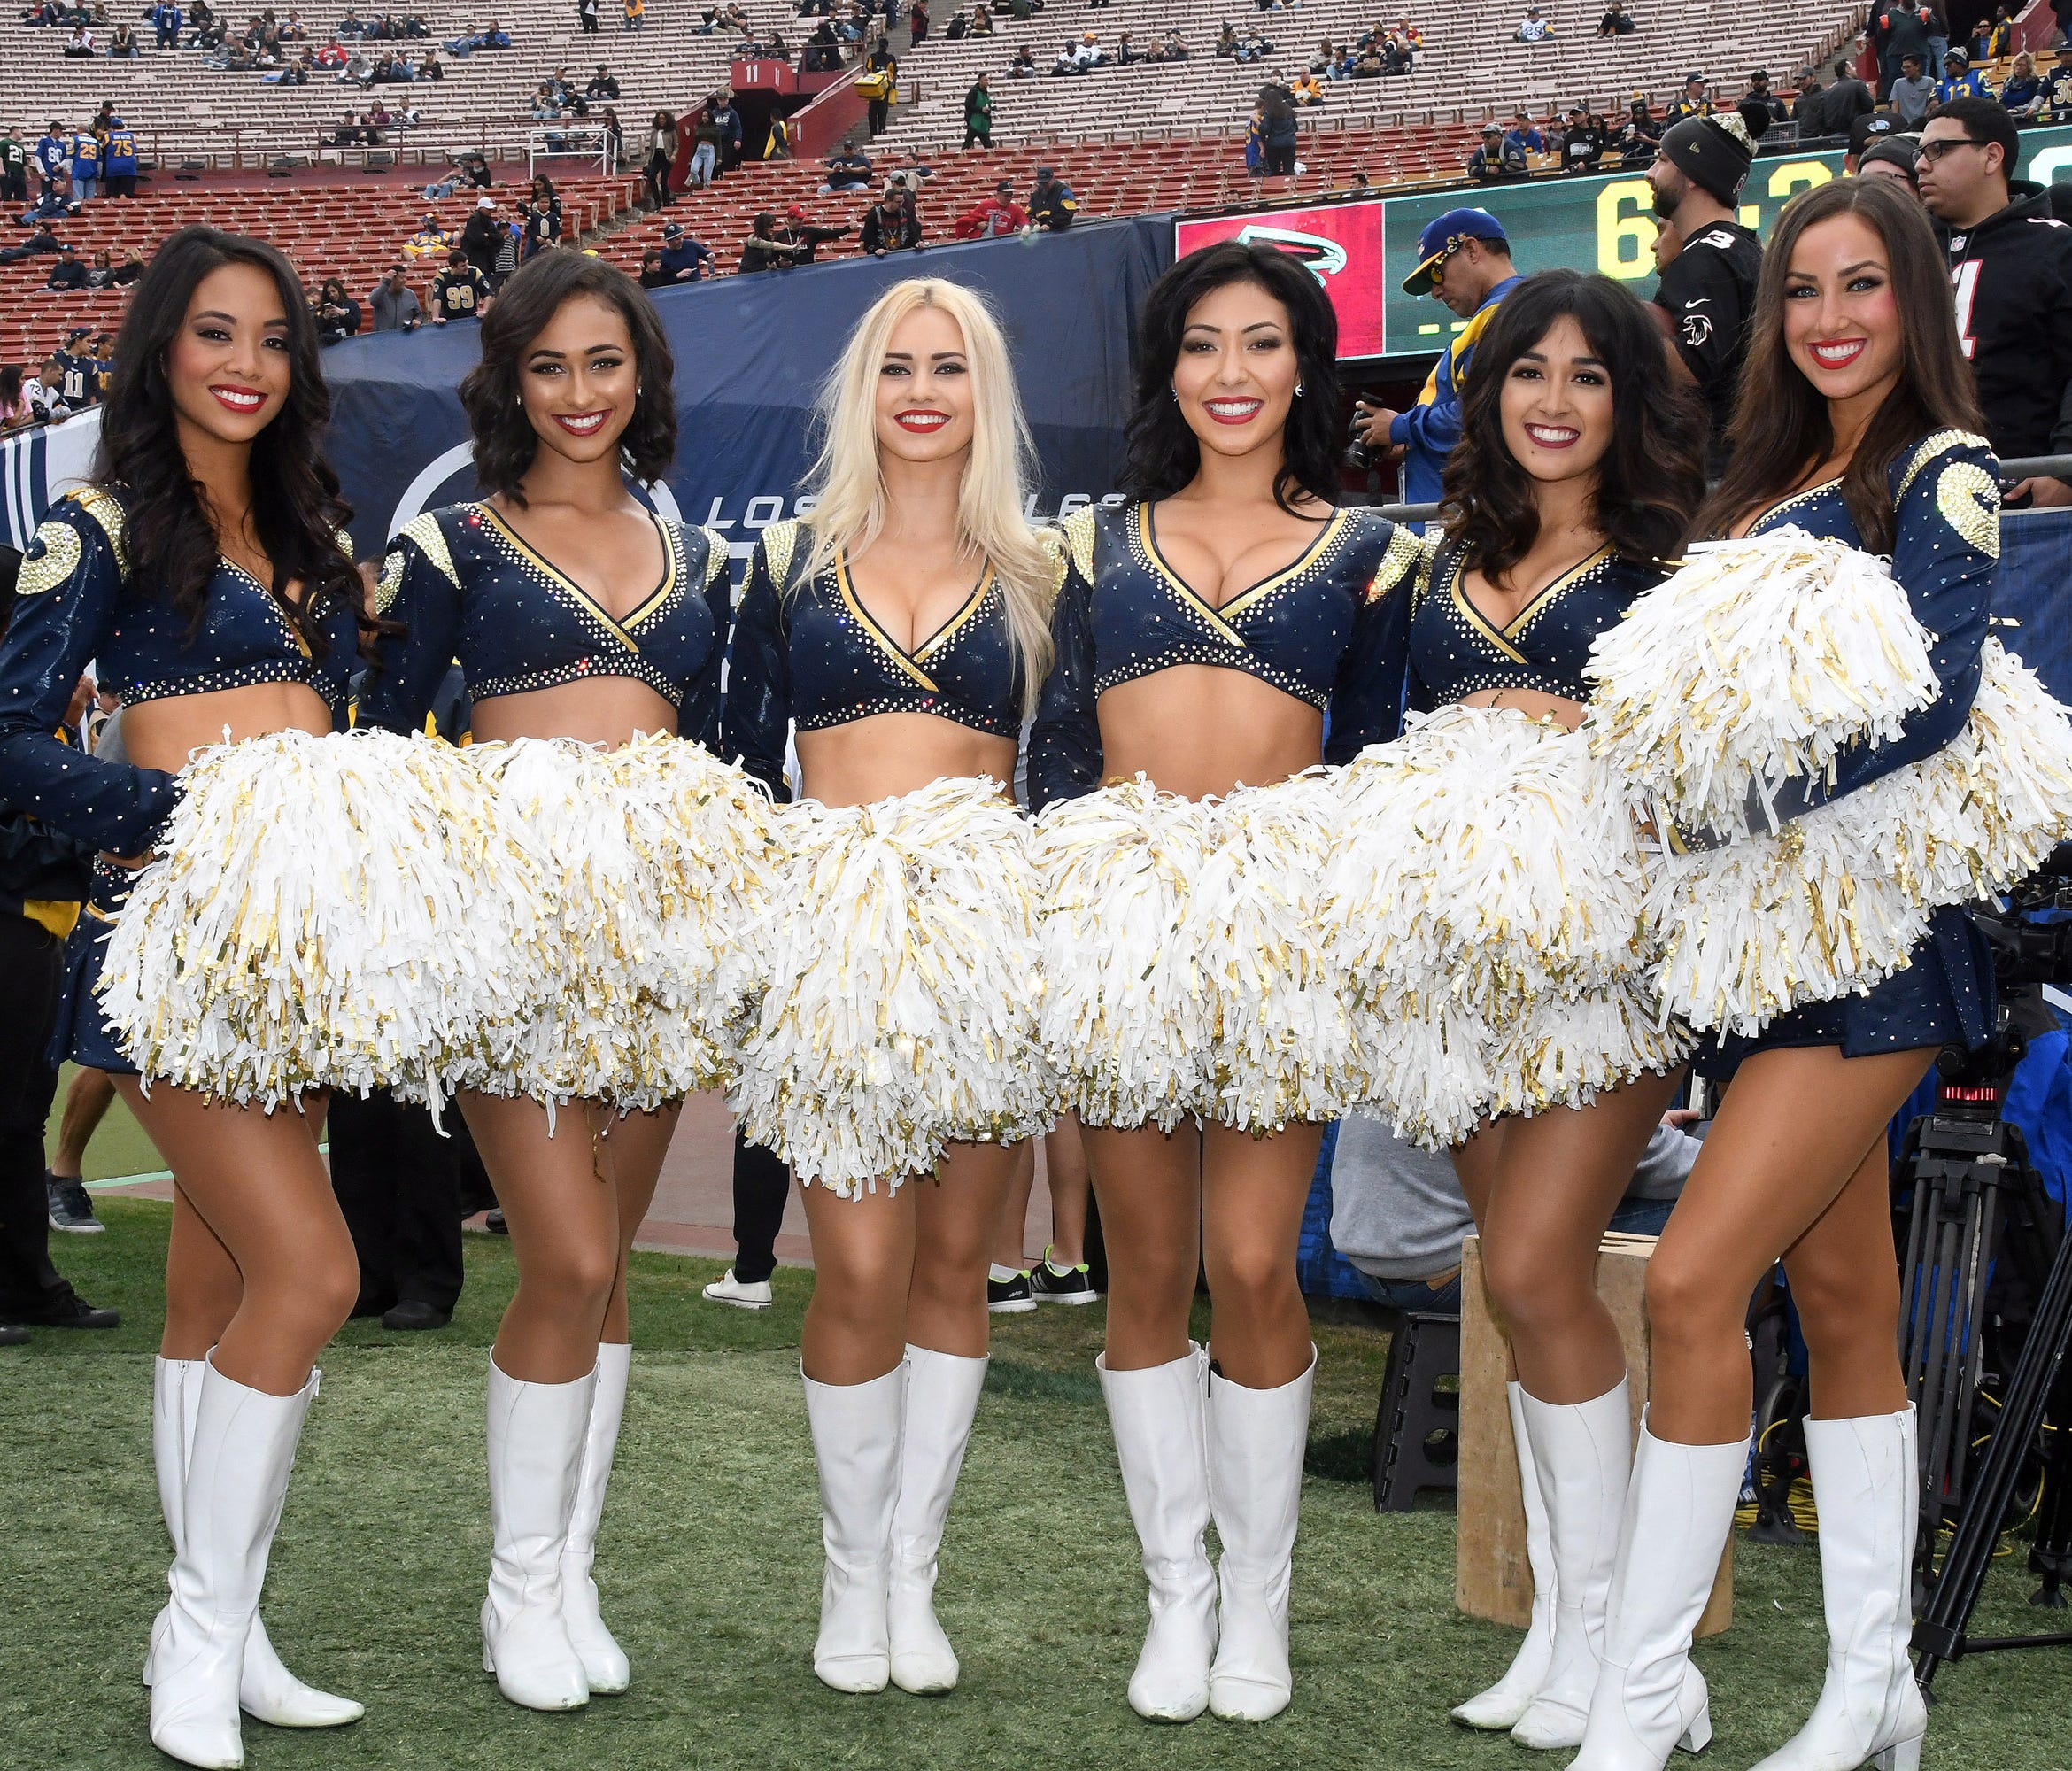 The Los Angeles Rams, like every other NFL team, had an all-female cheerleading squad in 2017. However, that won't be the case this season.